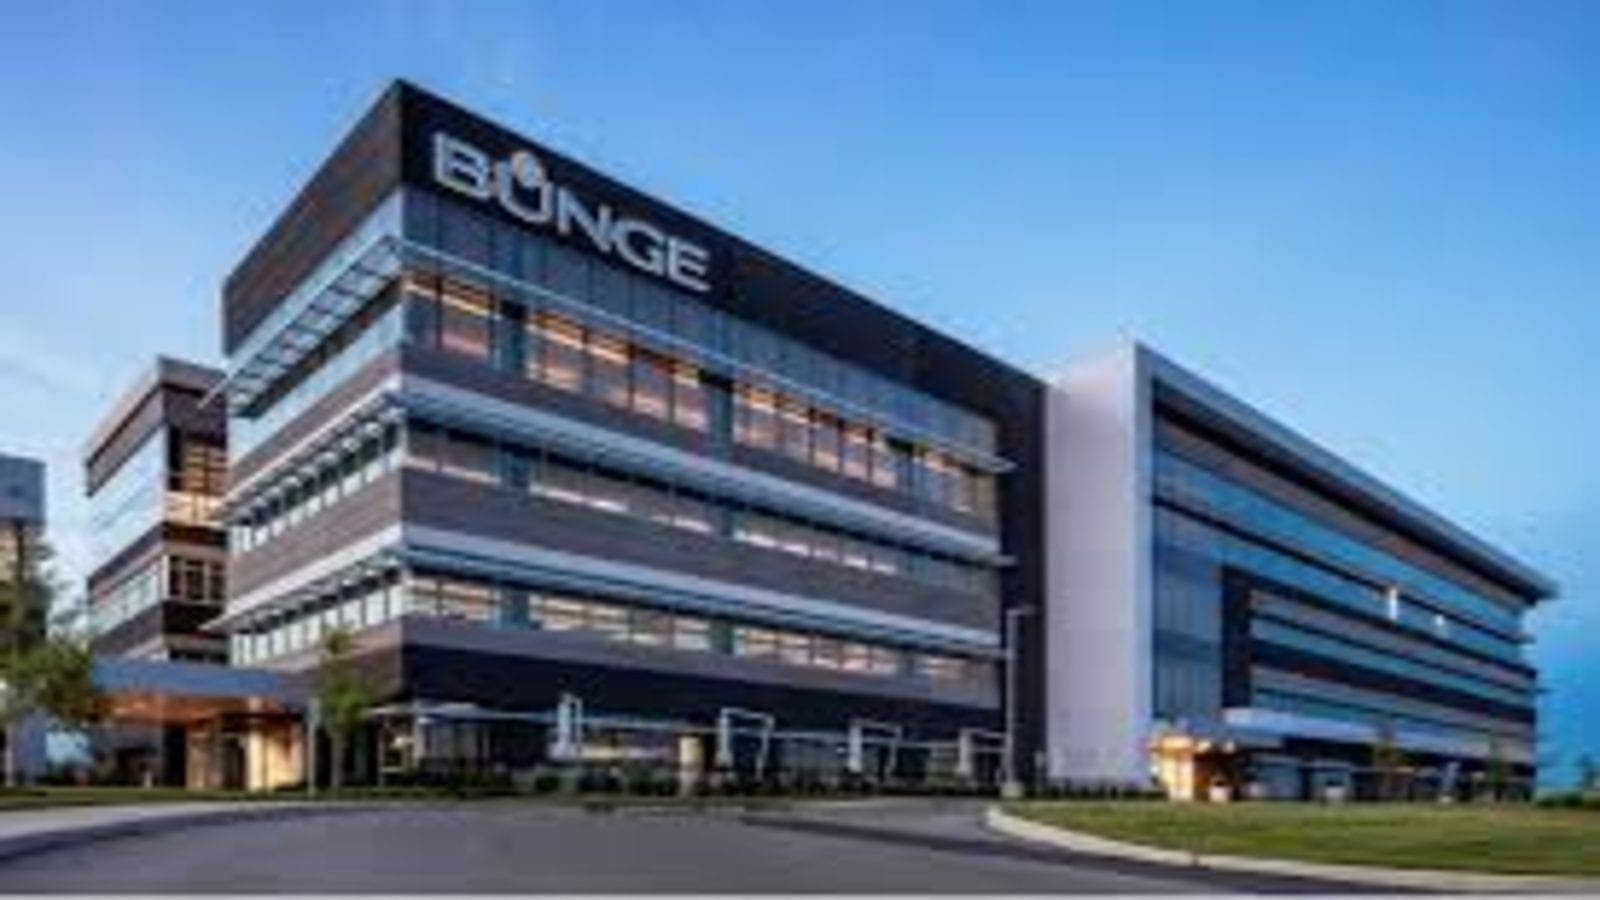 Bunge to build new facility in Netherlands to bolster capacity for sustainable plant-based oils and fats